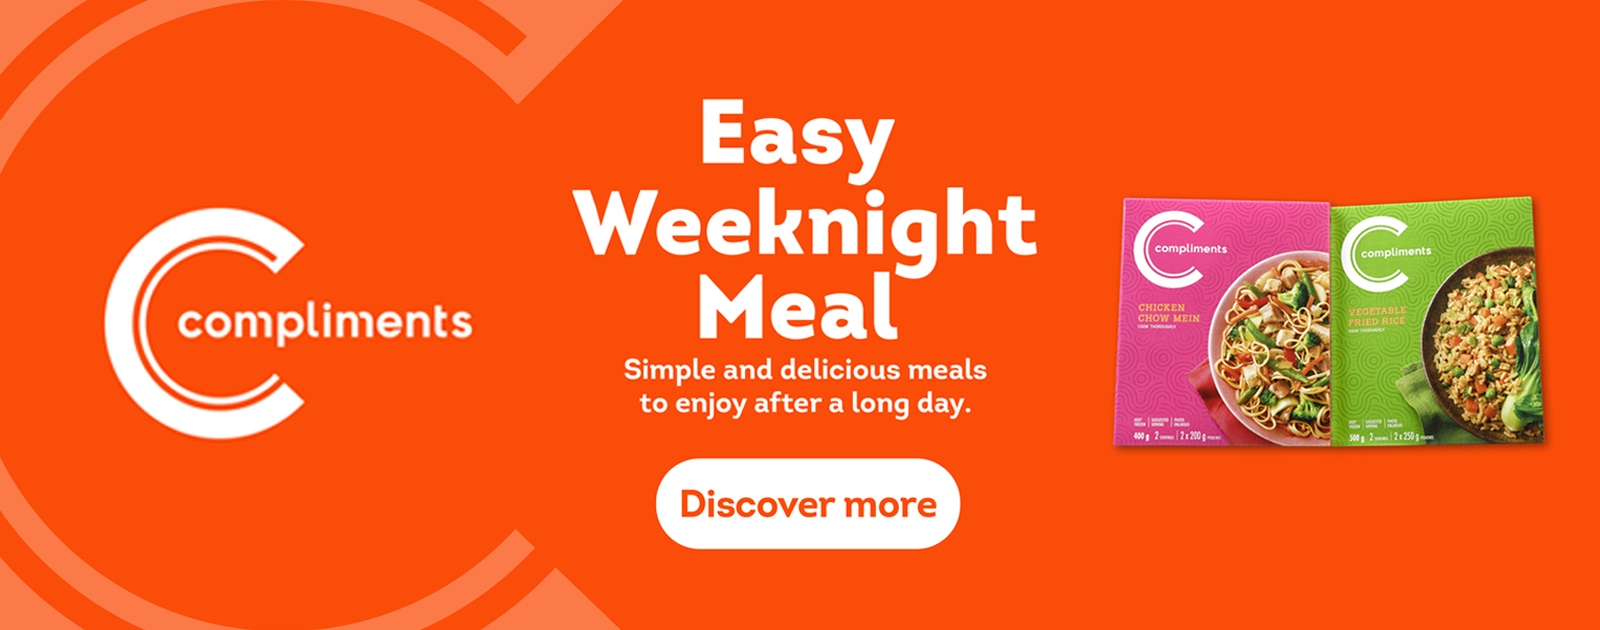 Compliments products on an Orange background. Headline:Easy Weeknight Meal, Copy: Simple and delicious meals to enjoy after a long day. Products featured are Compliments Chicken Chow Mein & Compliments Vegetable Fried Rice.